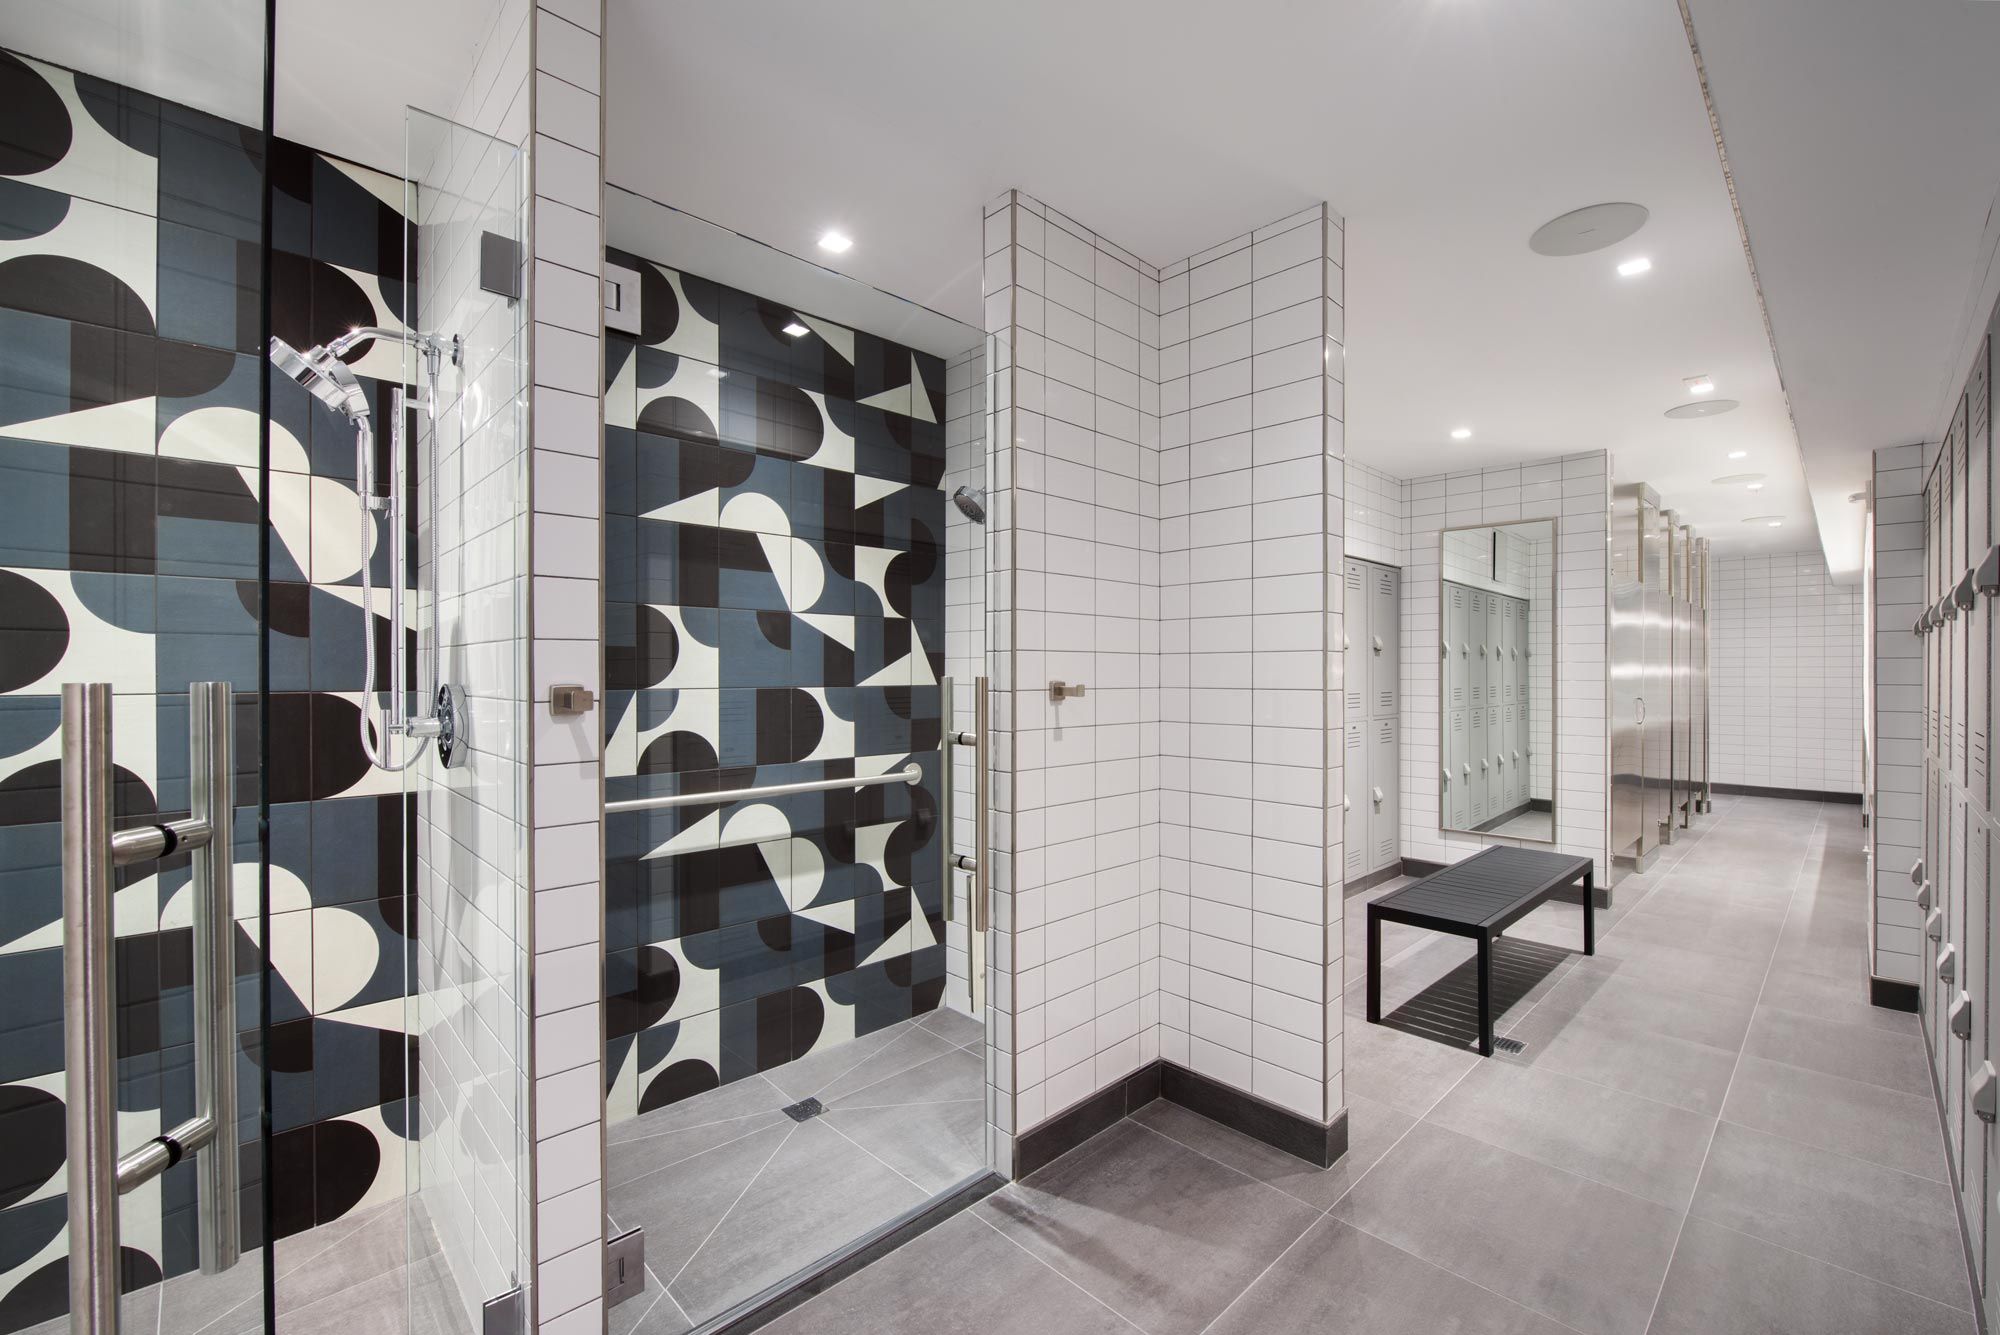 Luxury gym shower cubicles at the 99 Park Avenue hotel